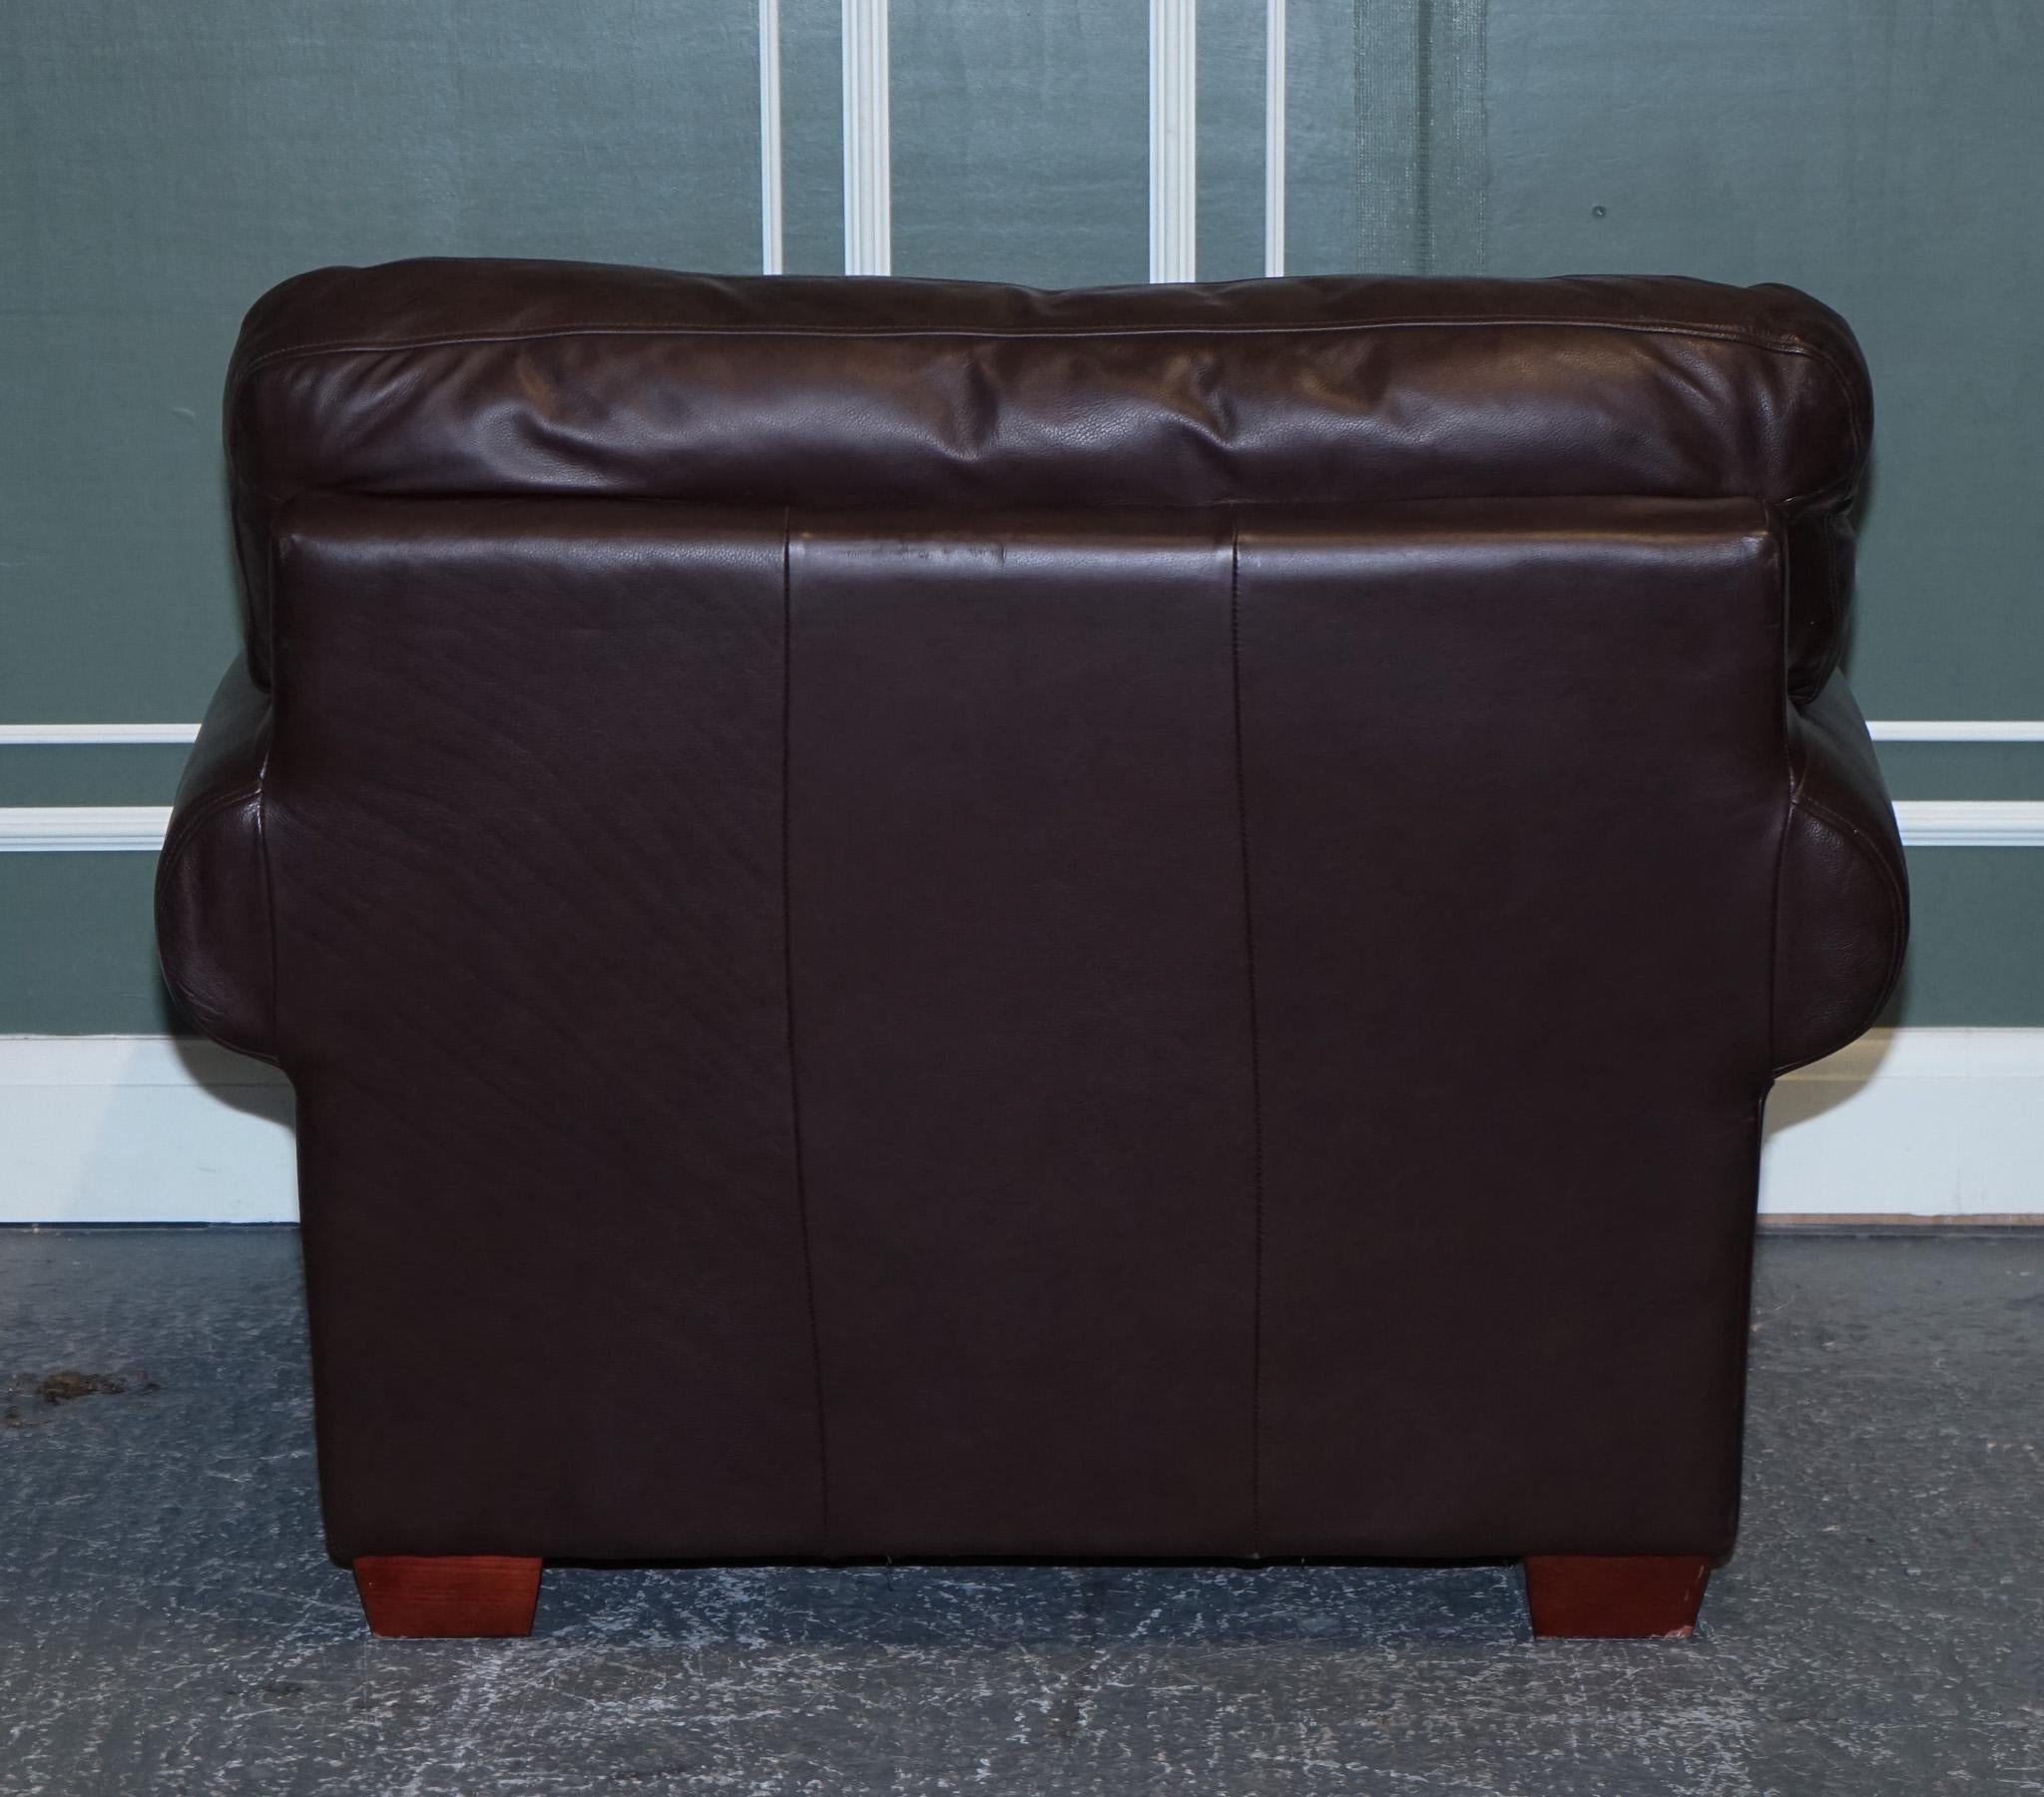 PAIR OF LARGE COMFORTABLE BROWN LEATHER ARMCHAIRS, MATCHiNG SOFA AVAILABLE For Sale 3